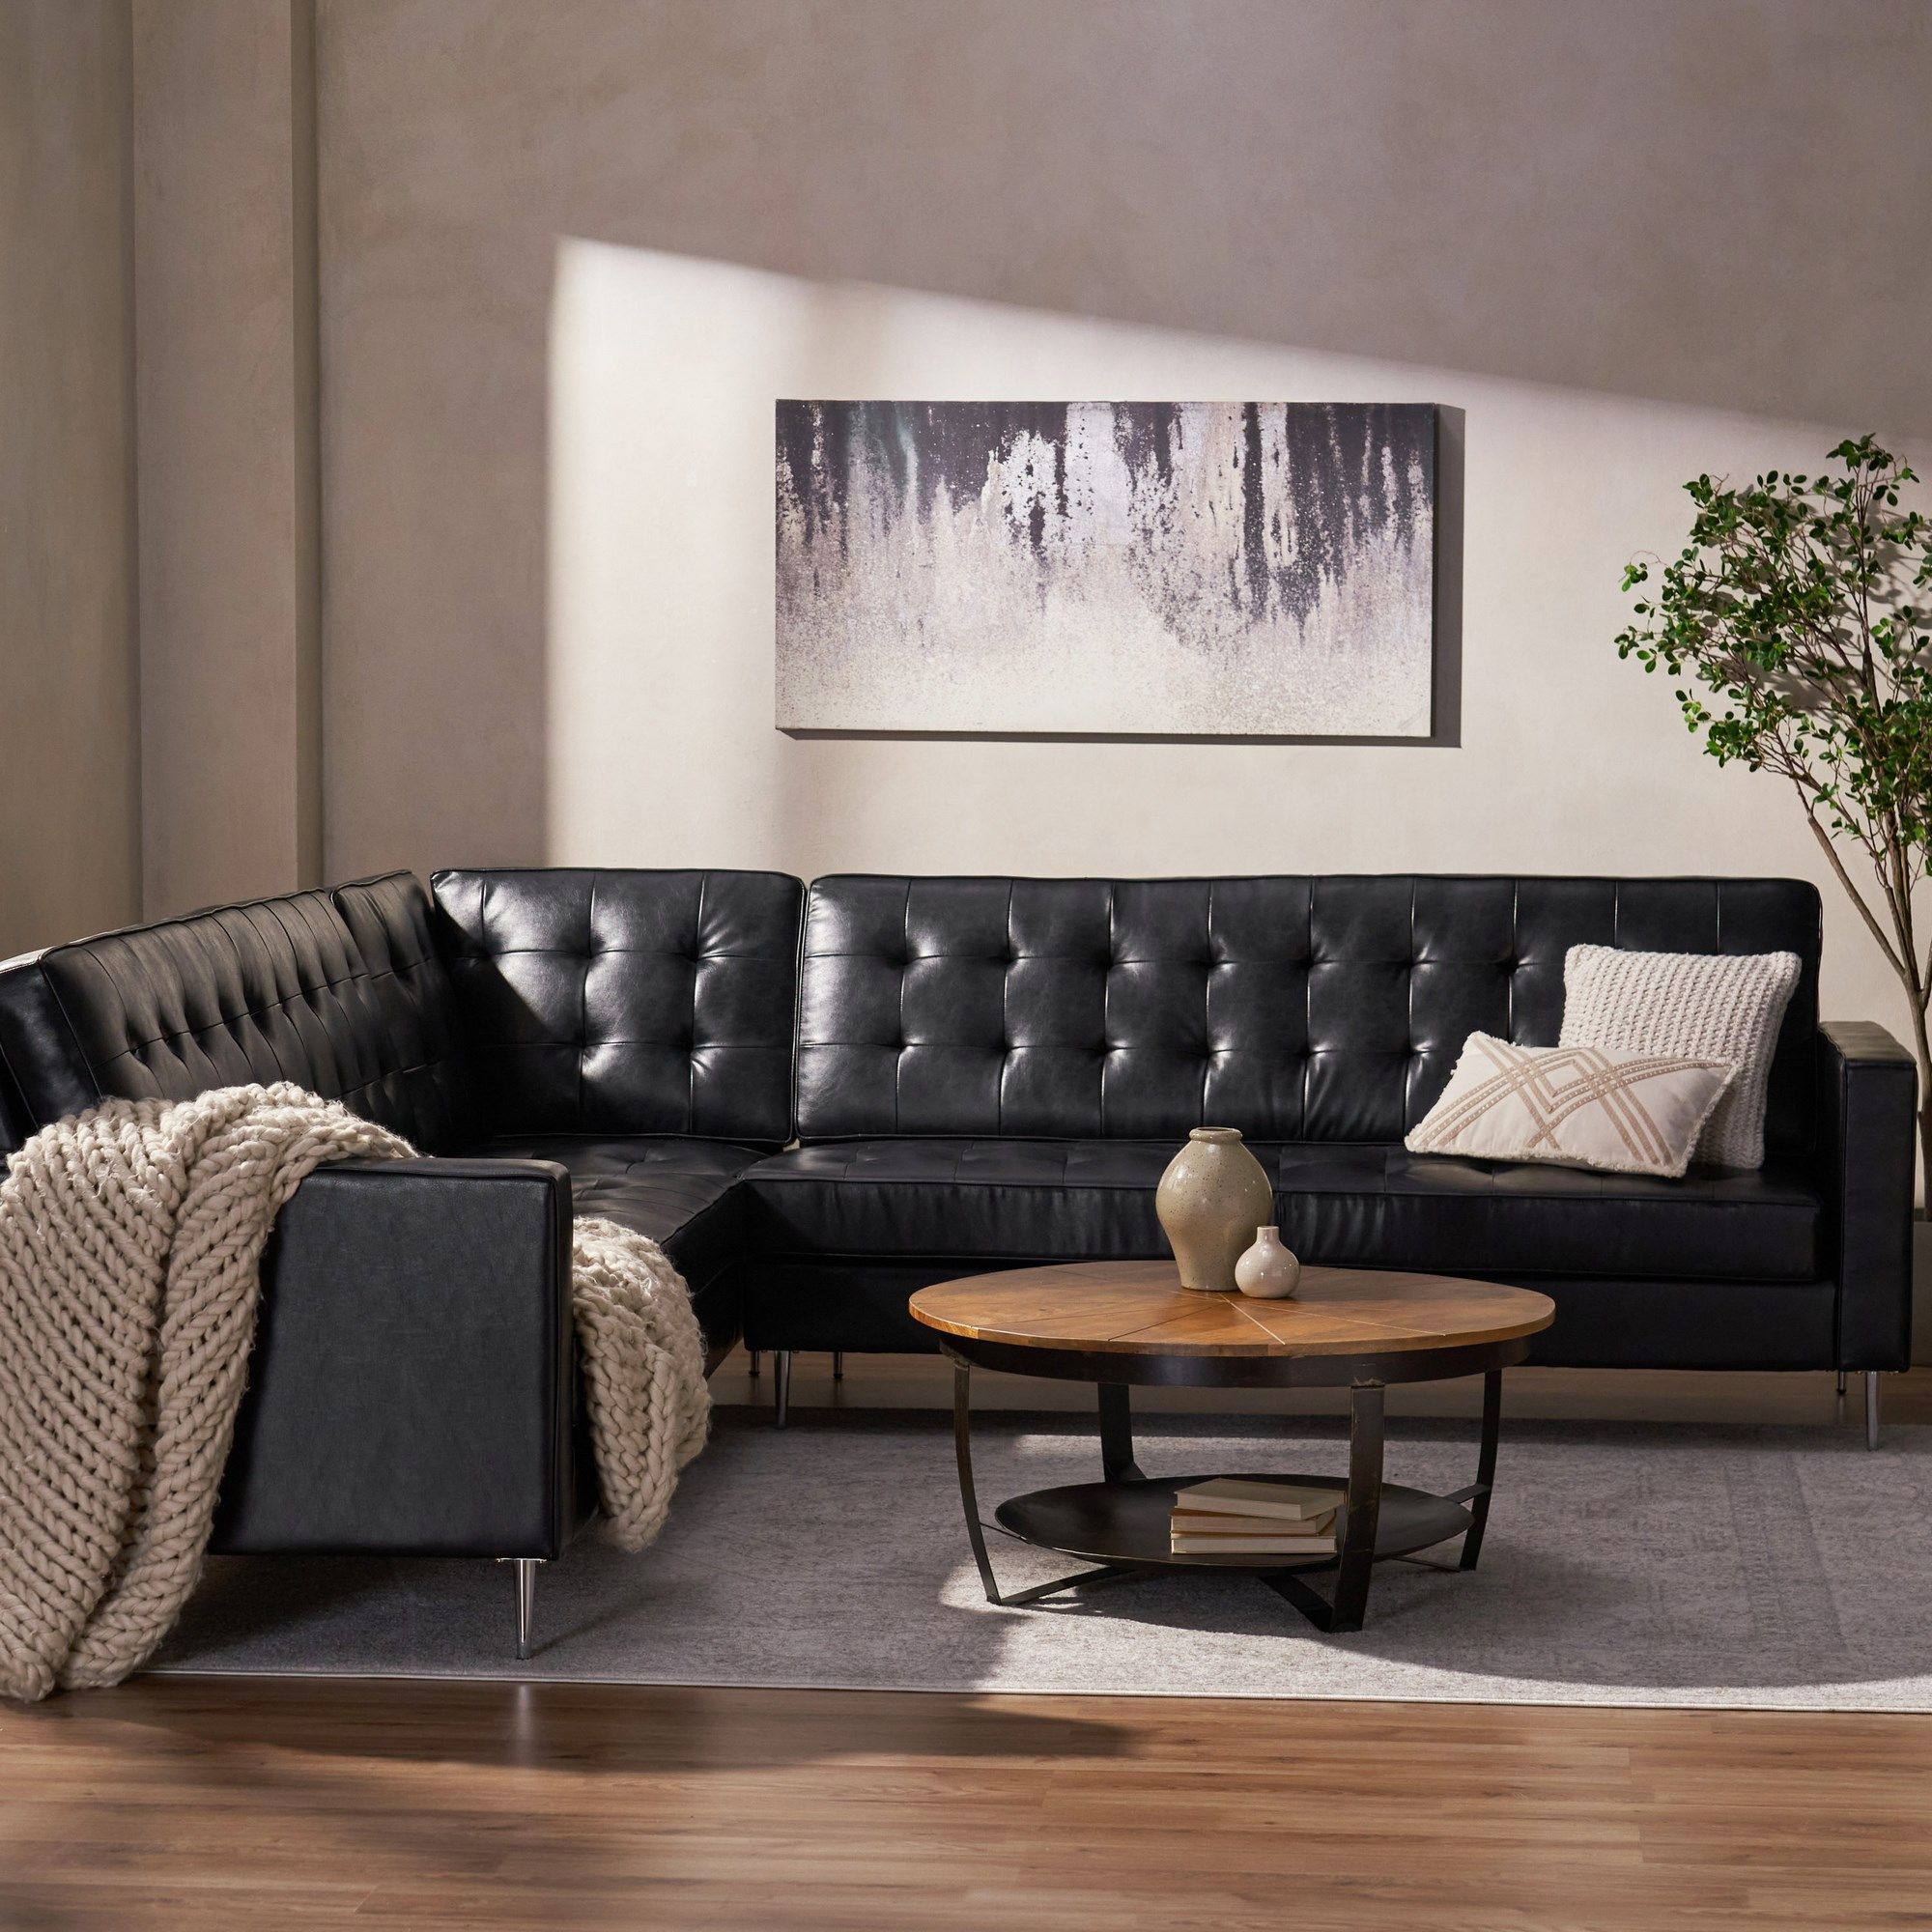 Gebo Contemporary Faux Leather Tufted 5 Seater Sectional Sofa Set, Midnight  Black And Chrome With Faux Leather Sectional Sofa Sets (View 9 of 15)